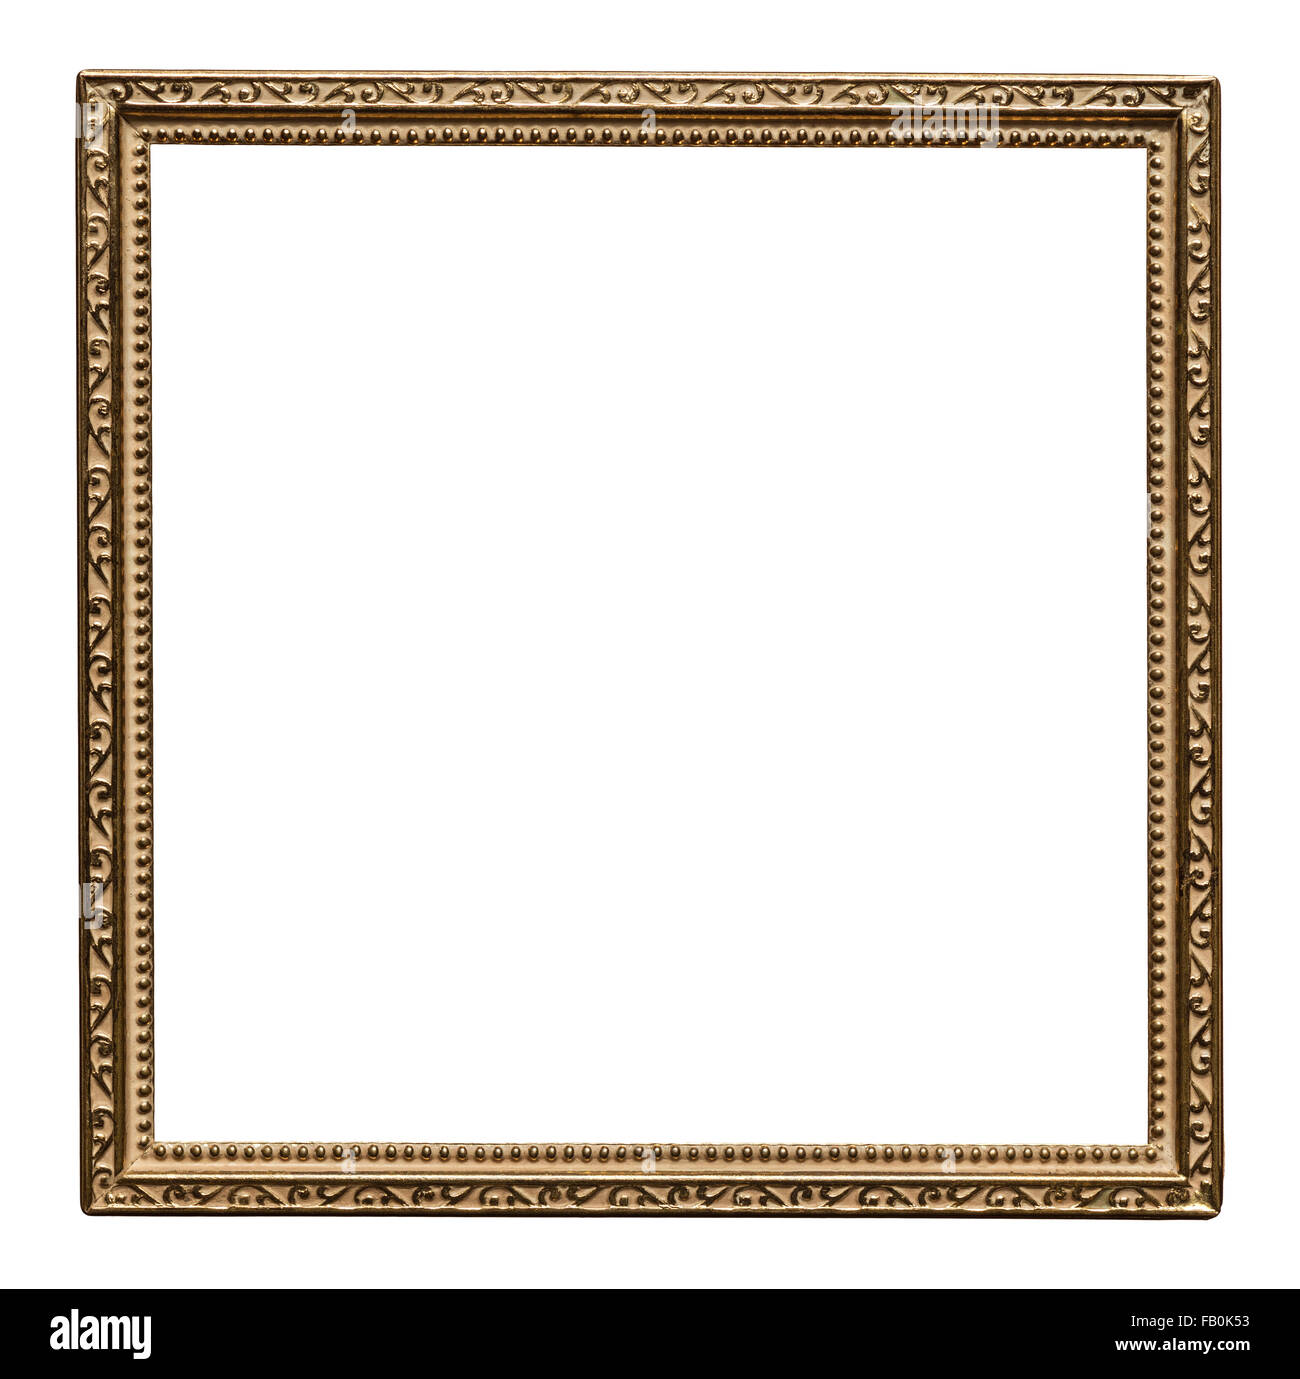 Vintage brass metal frame, isolated. Stock Photo